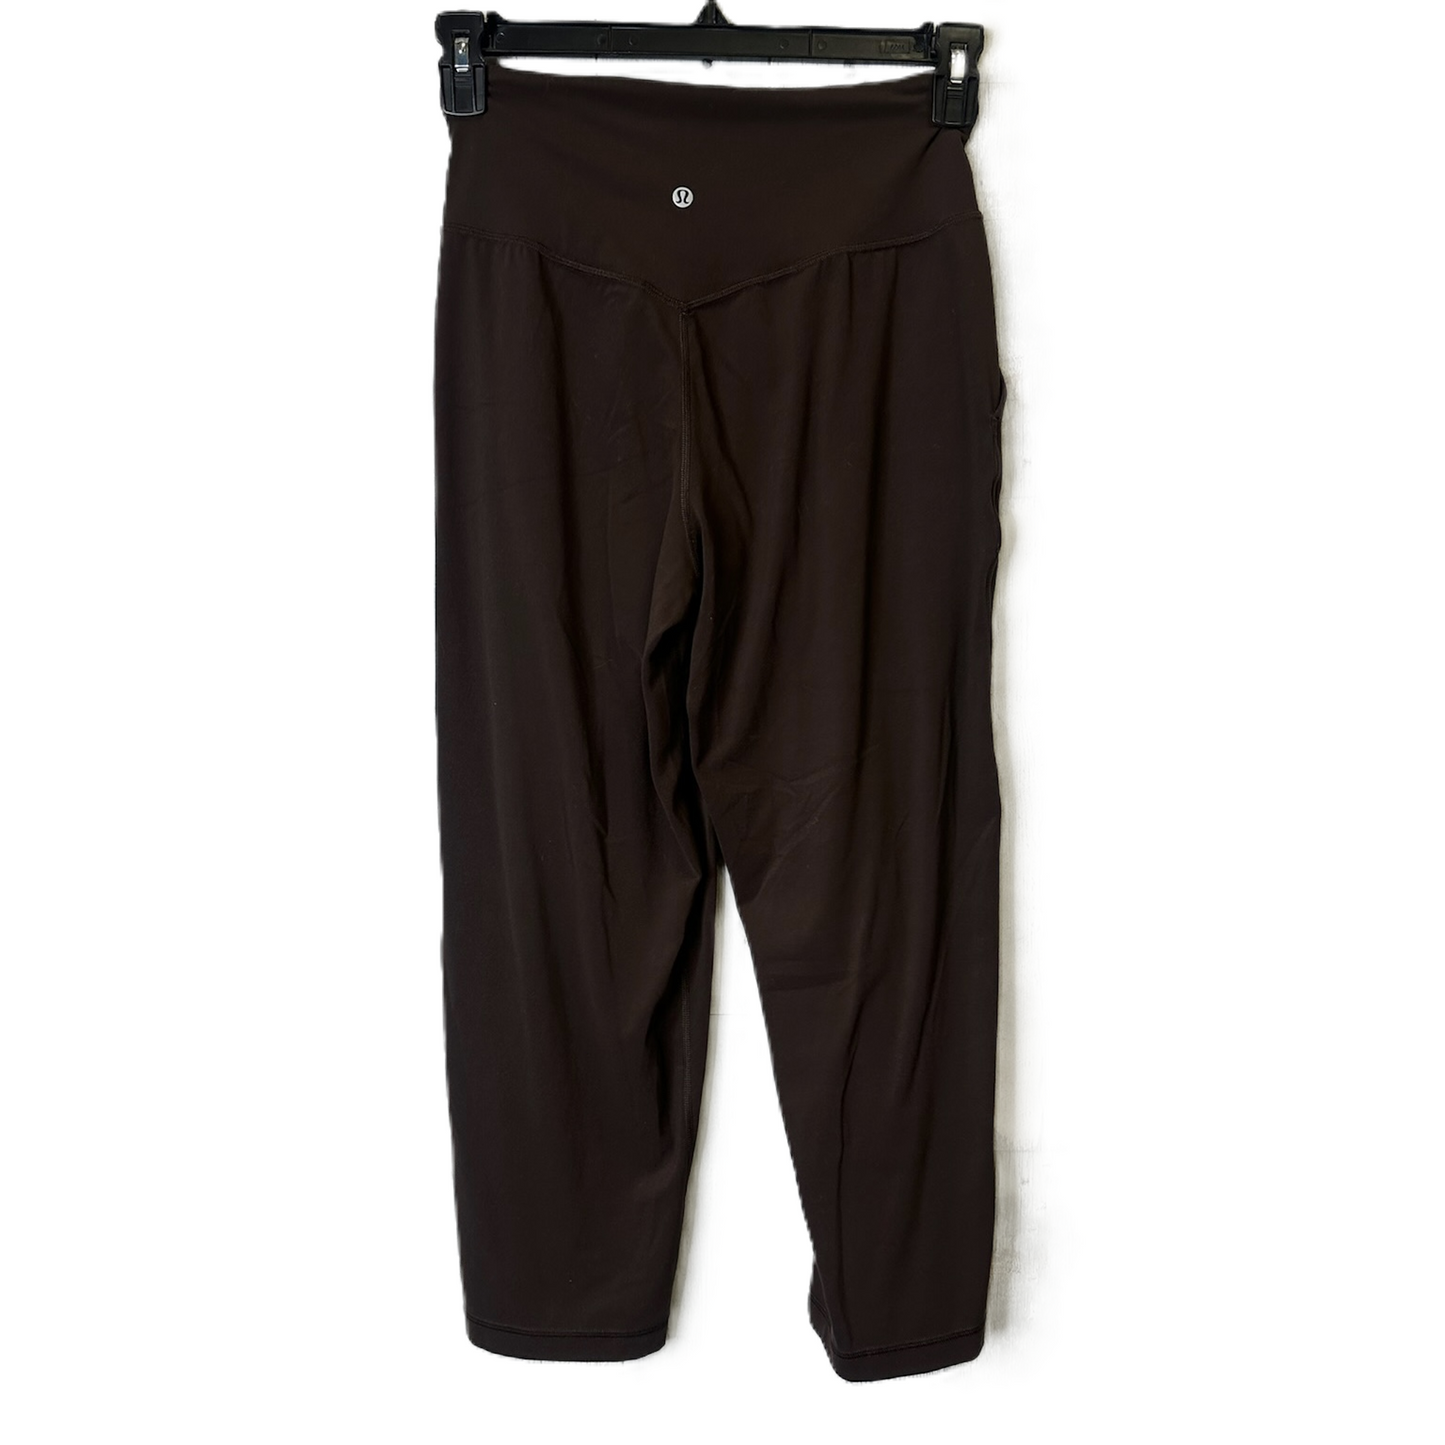 Brown Athletic Pants By Lululemon, Size: 6